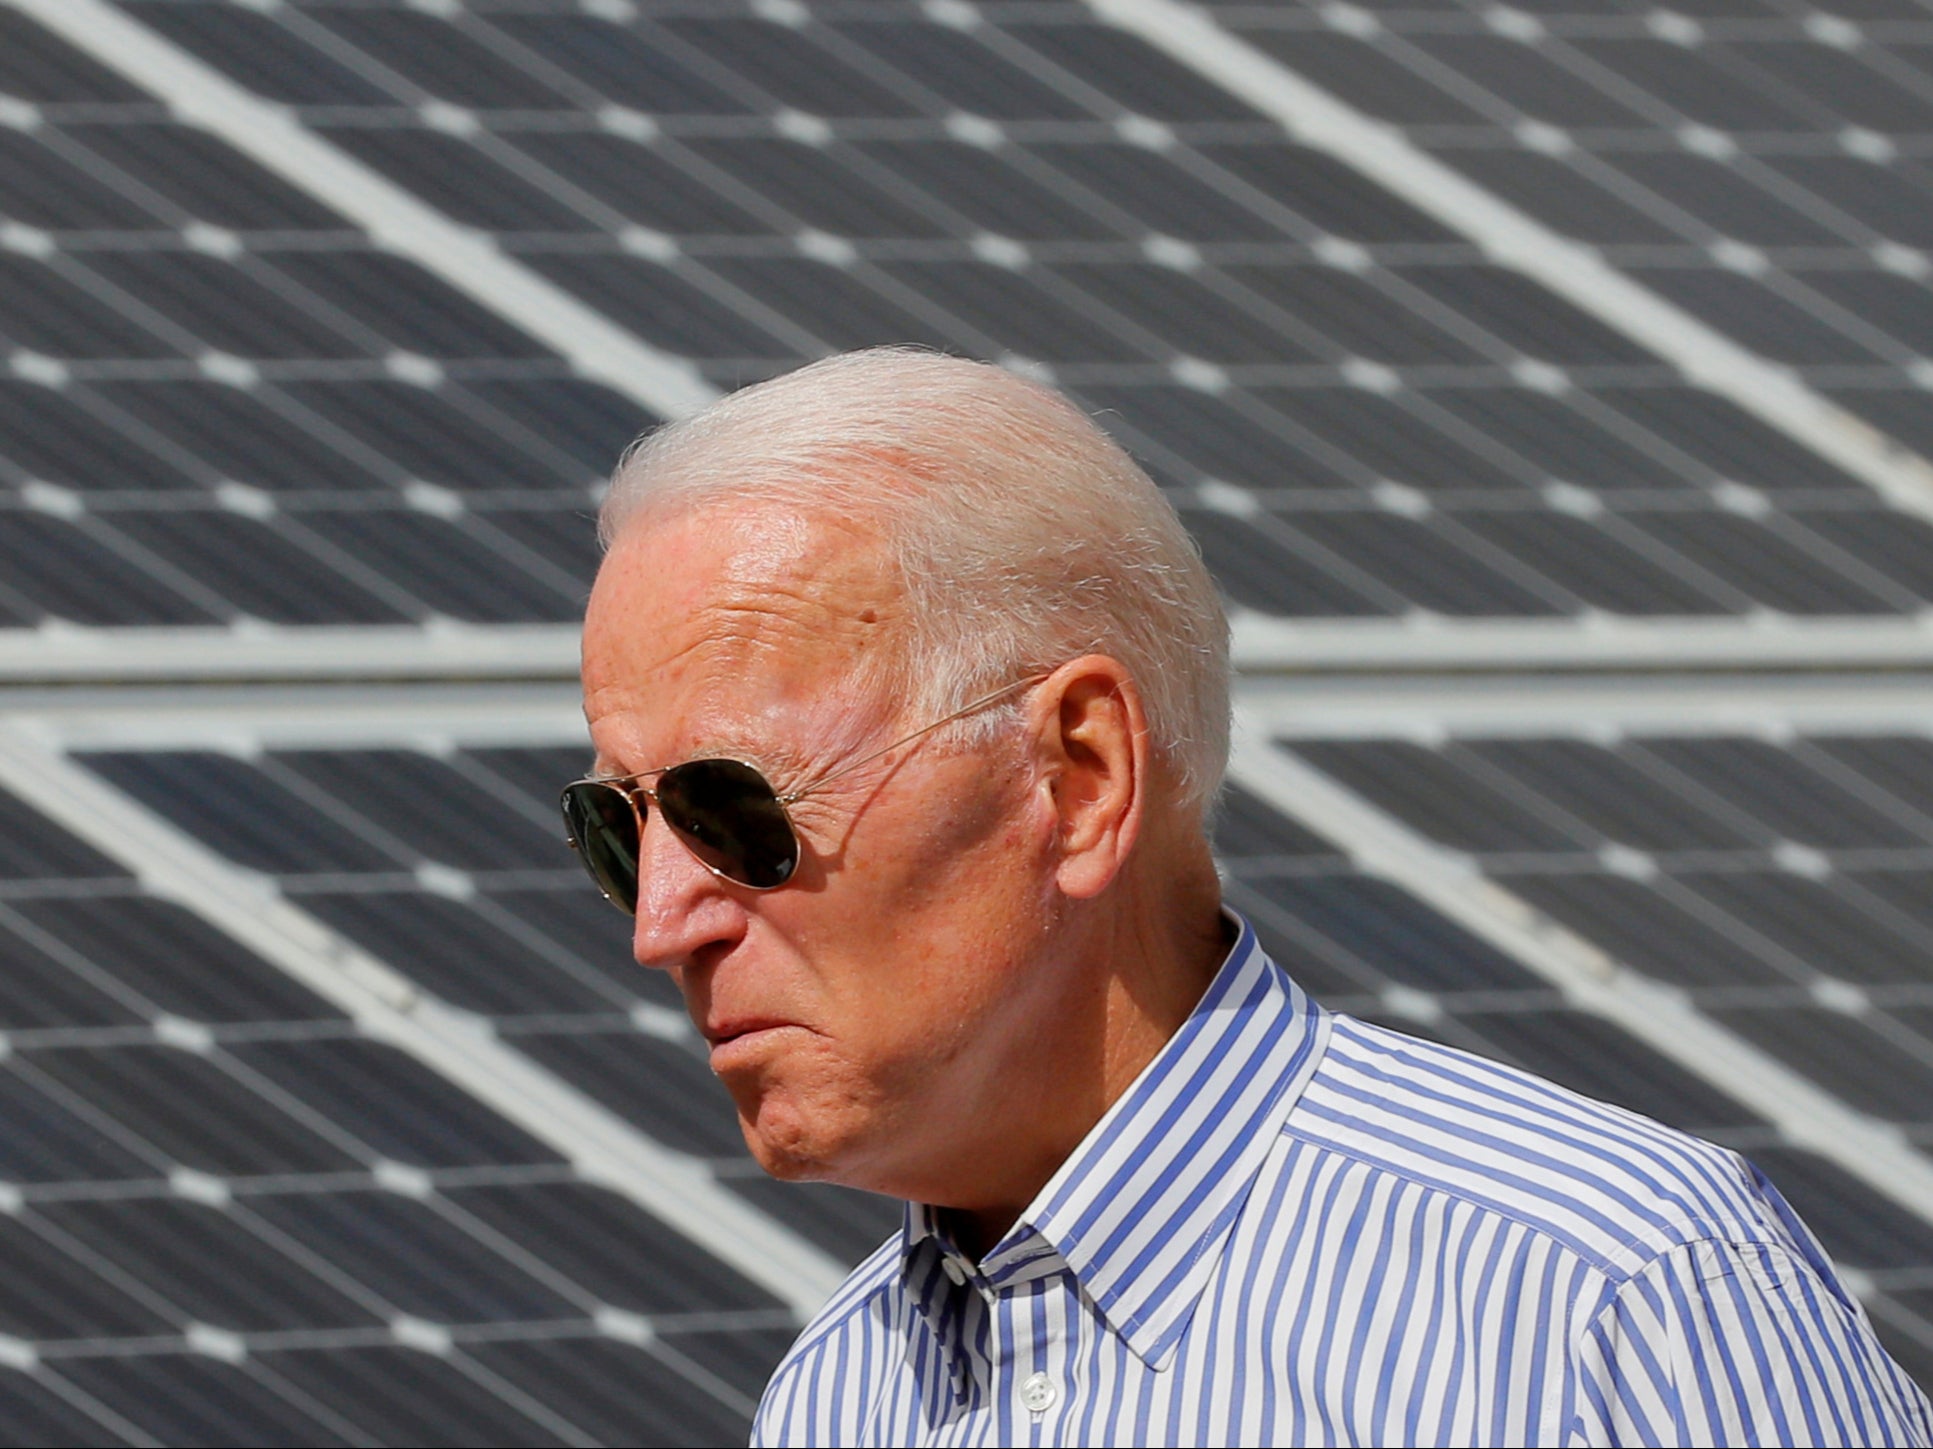 Joe Biden walks past solar panels while touring the Plymouth Area Renewable Energy Initiative in New Hampshire